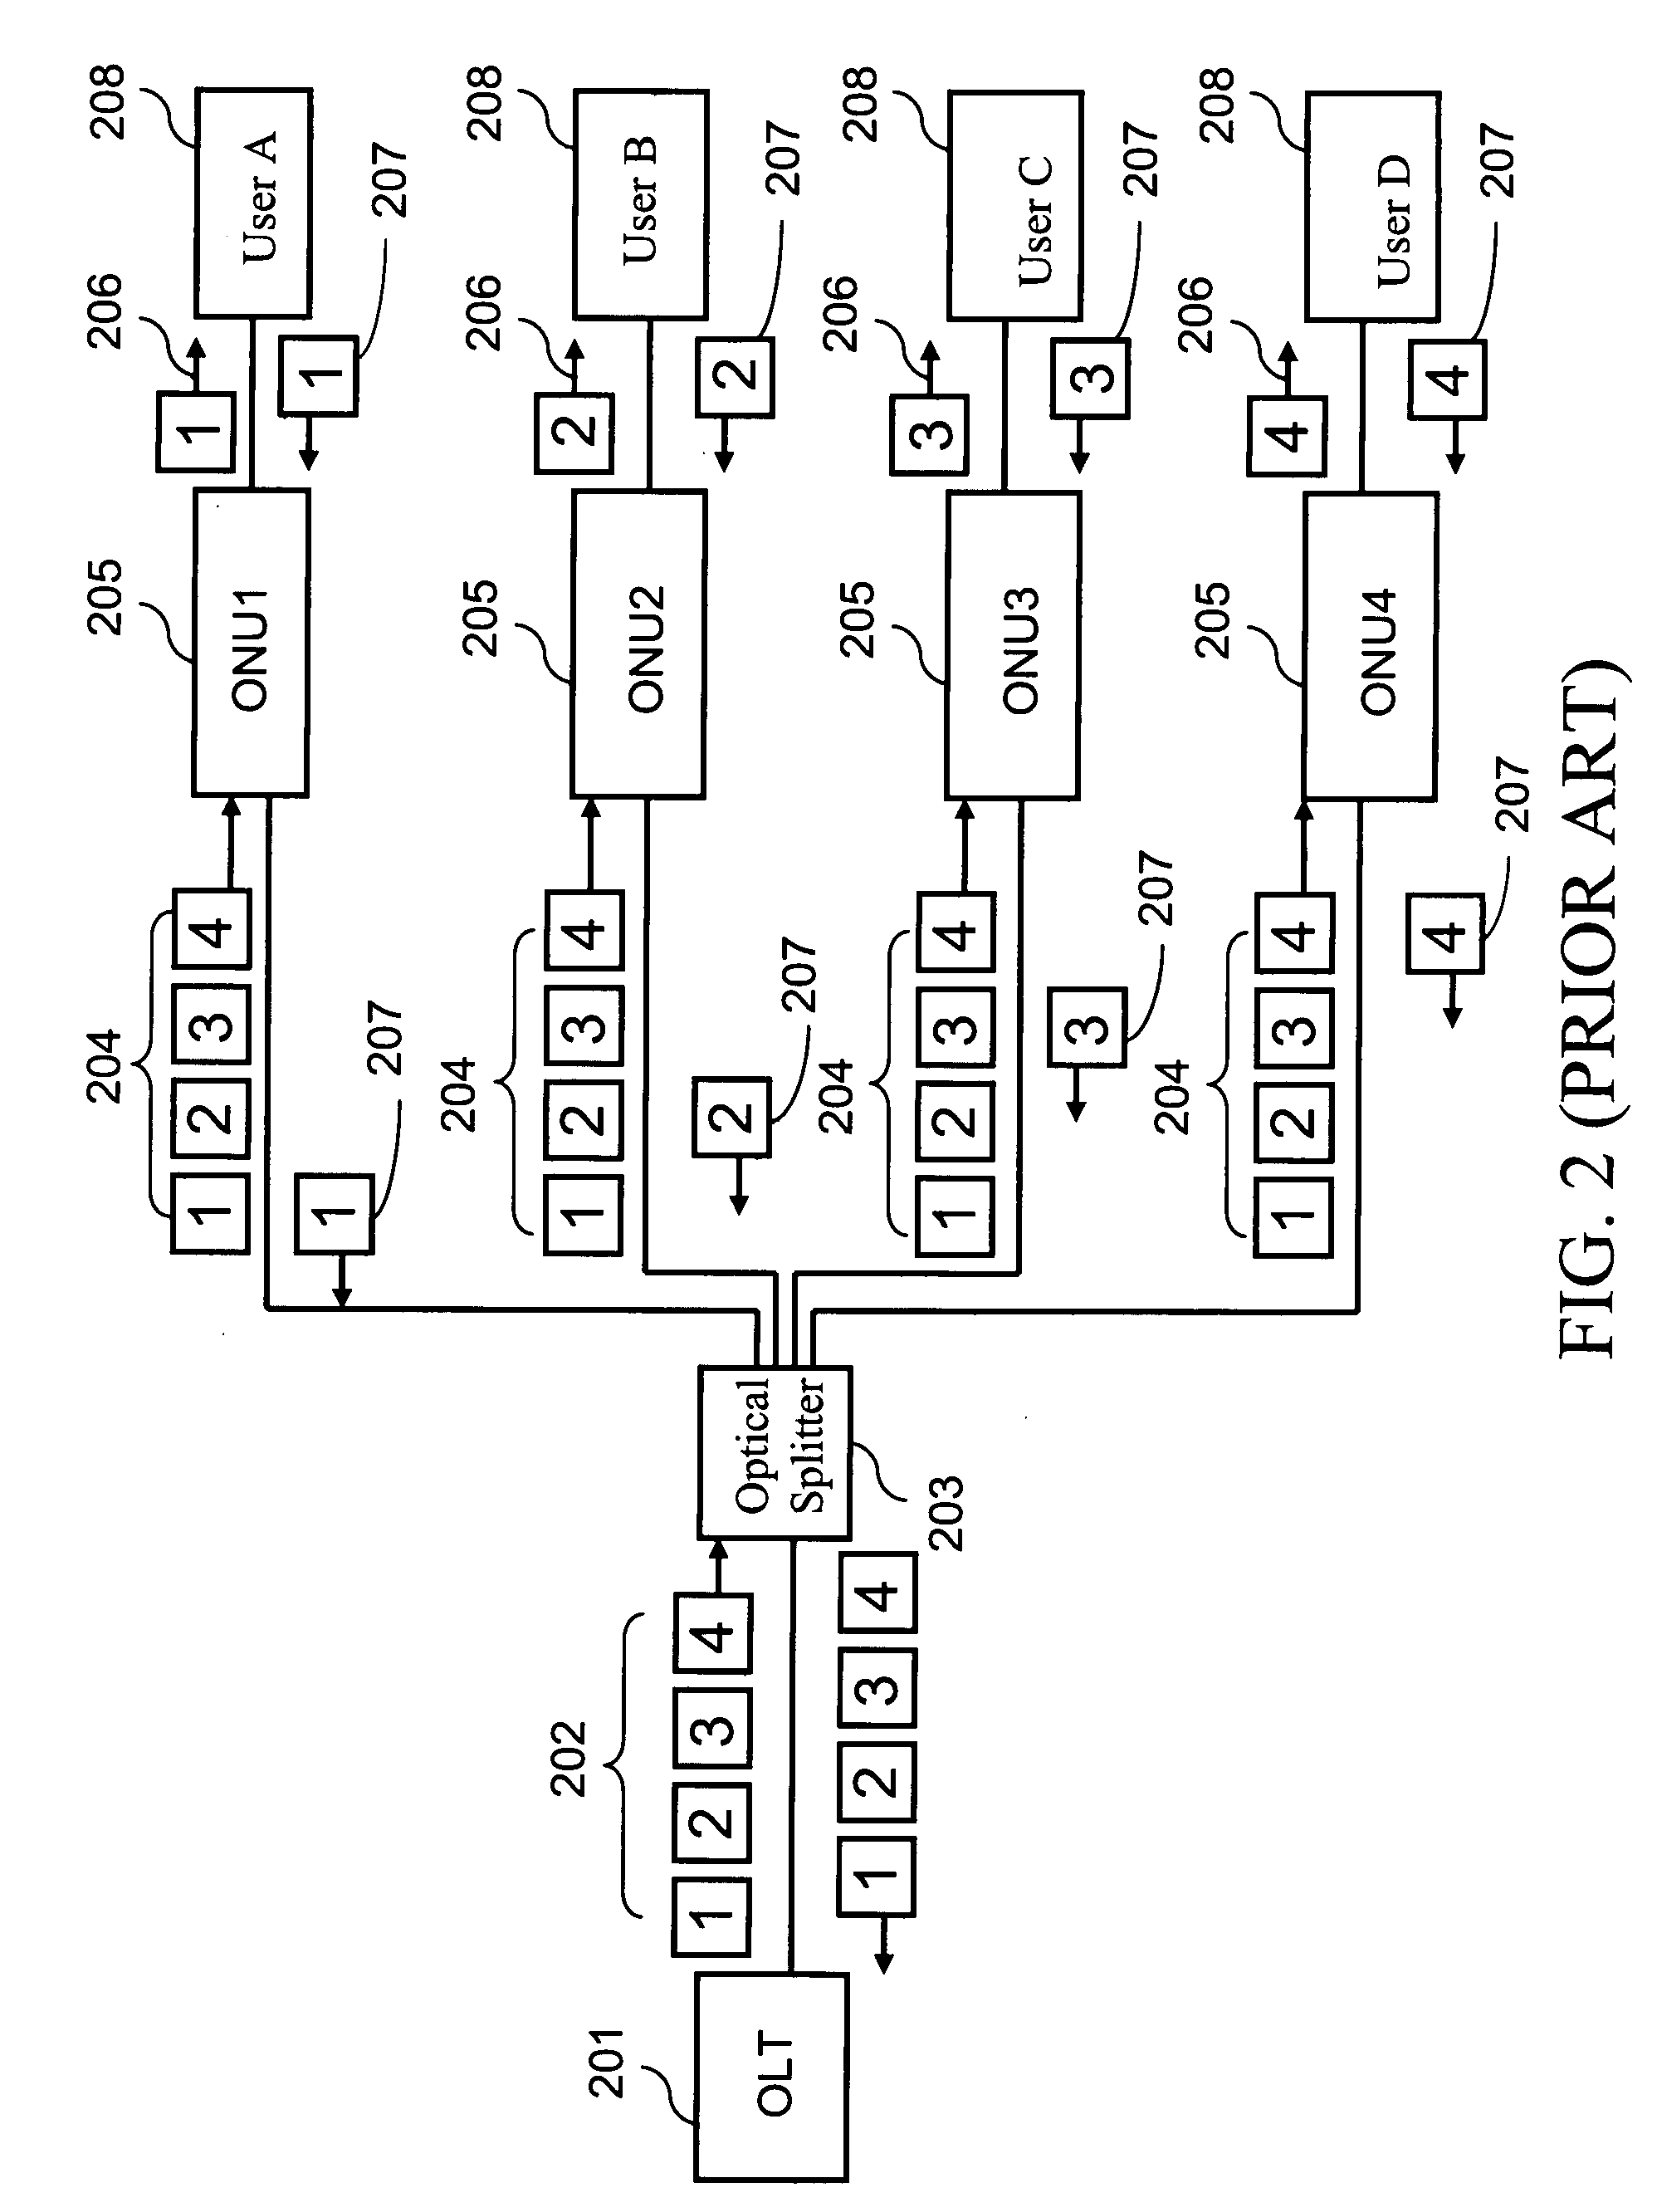 PON equipment capablel of displaying connection state and logical link identifier